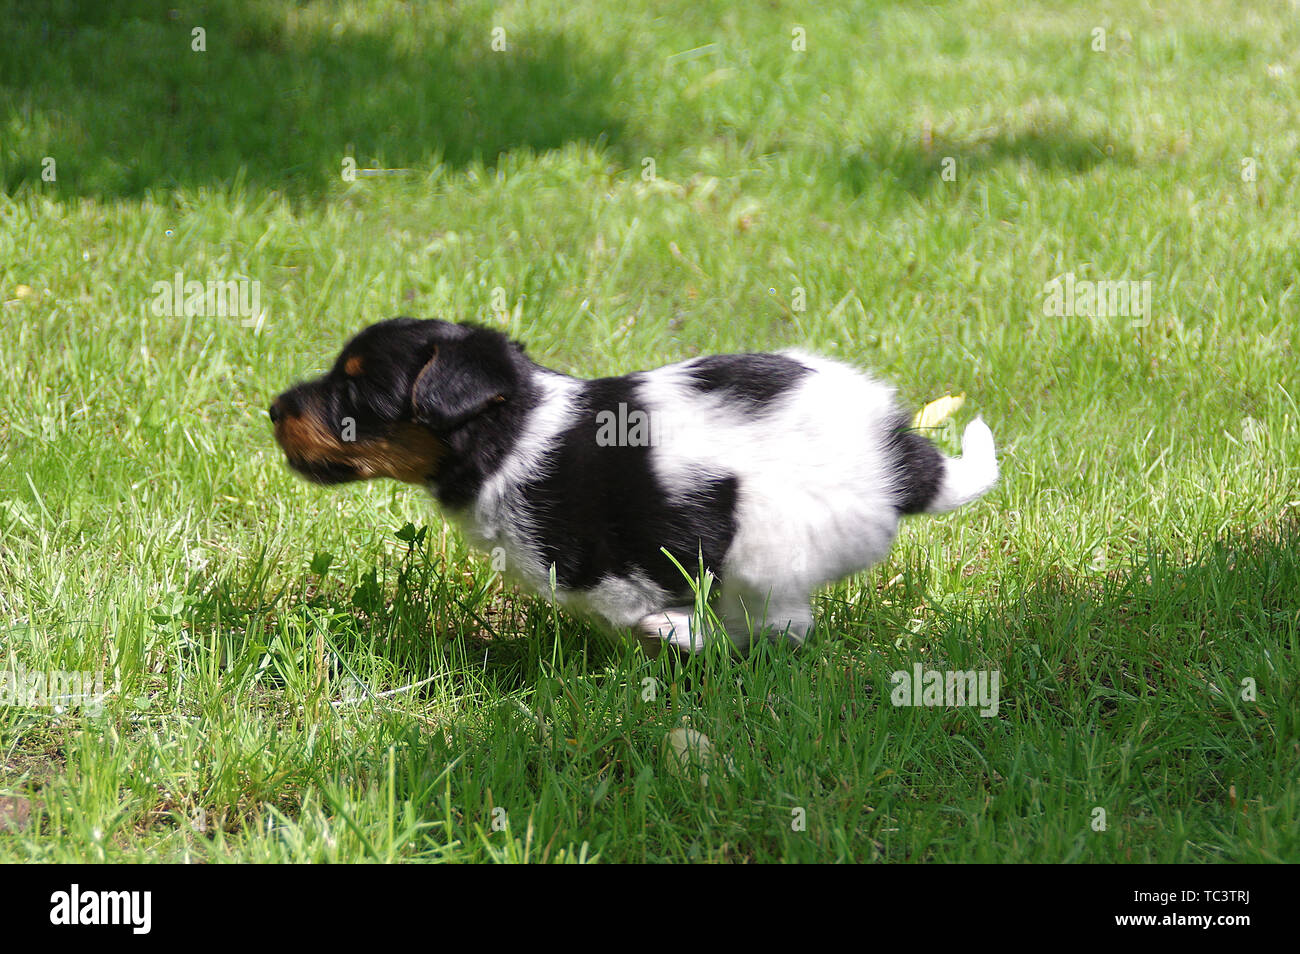 The puppy is running on the grass. The little dog gets to know the world with curiosity. Young hunter. Stock Photo